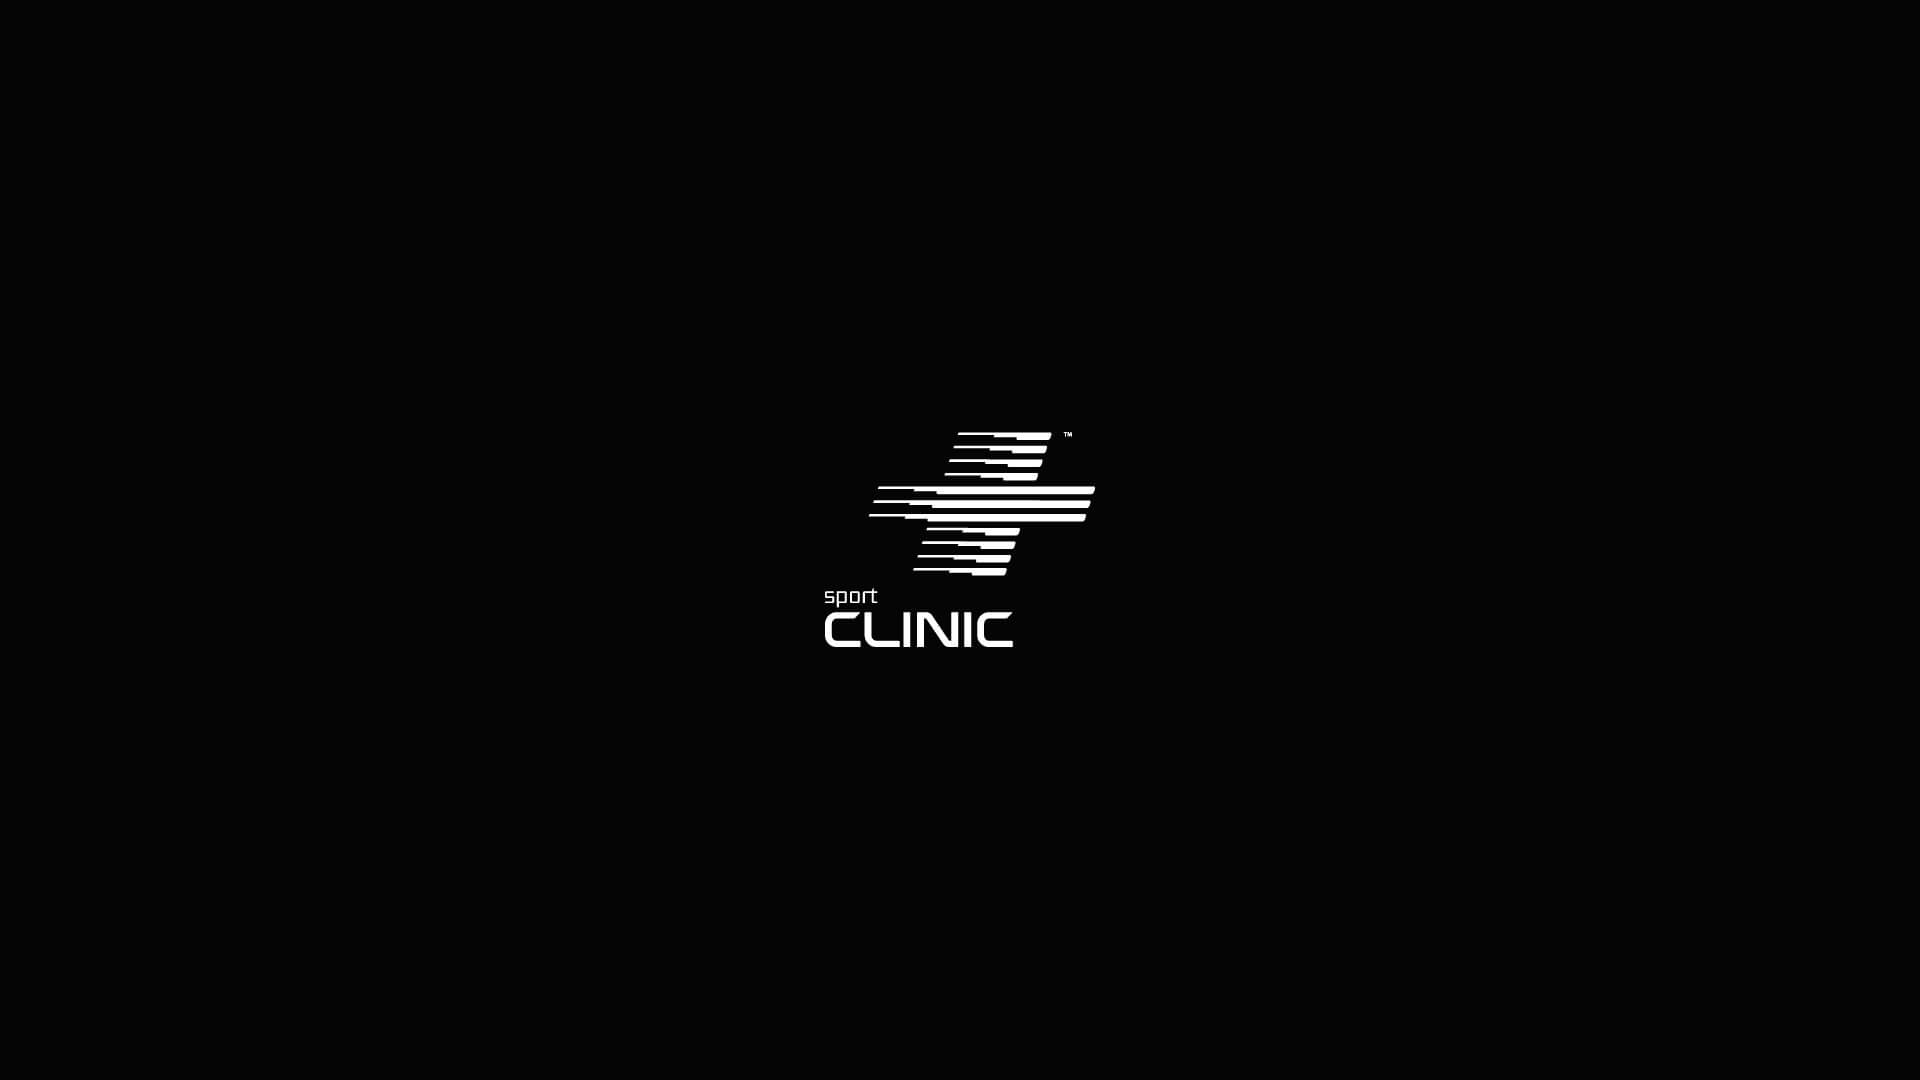 Clinic_layout_05